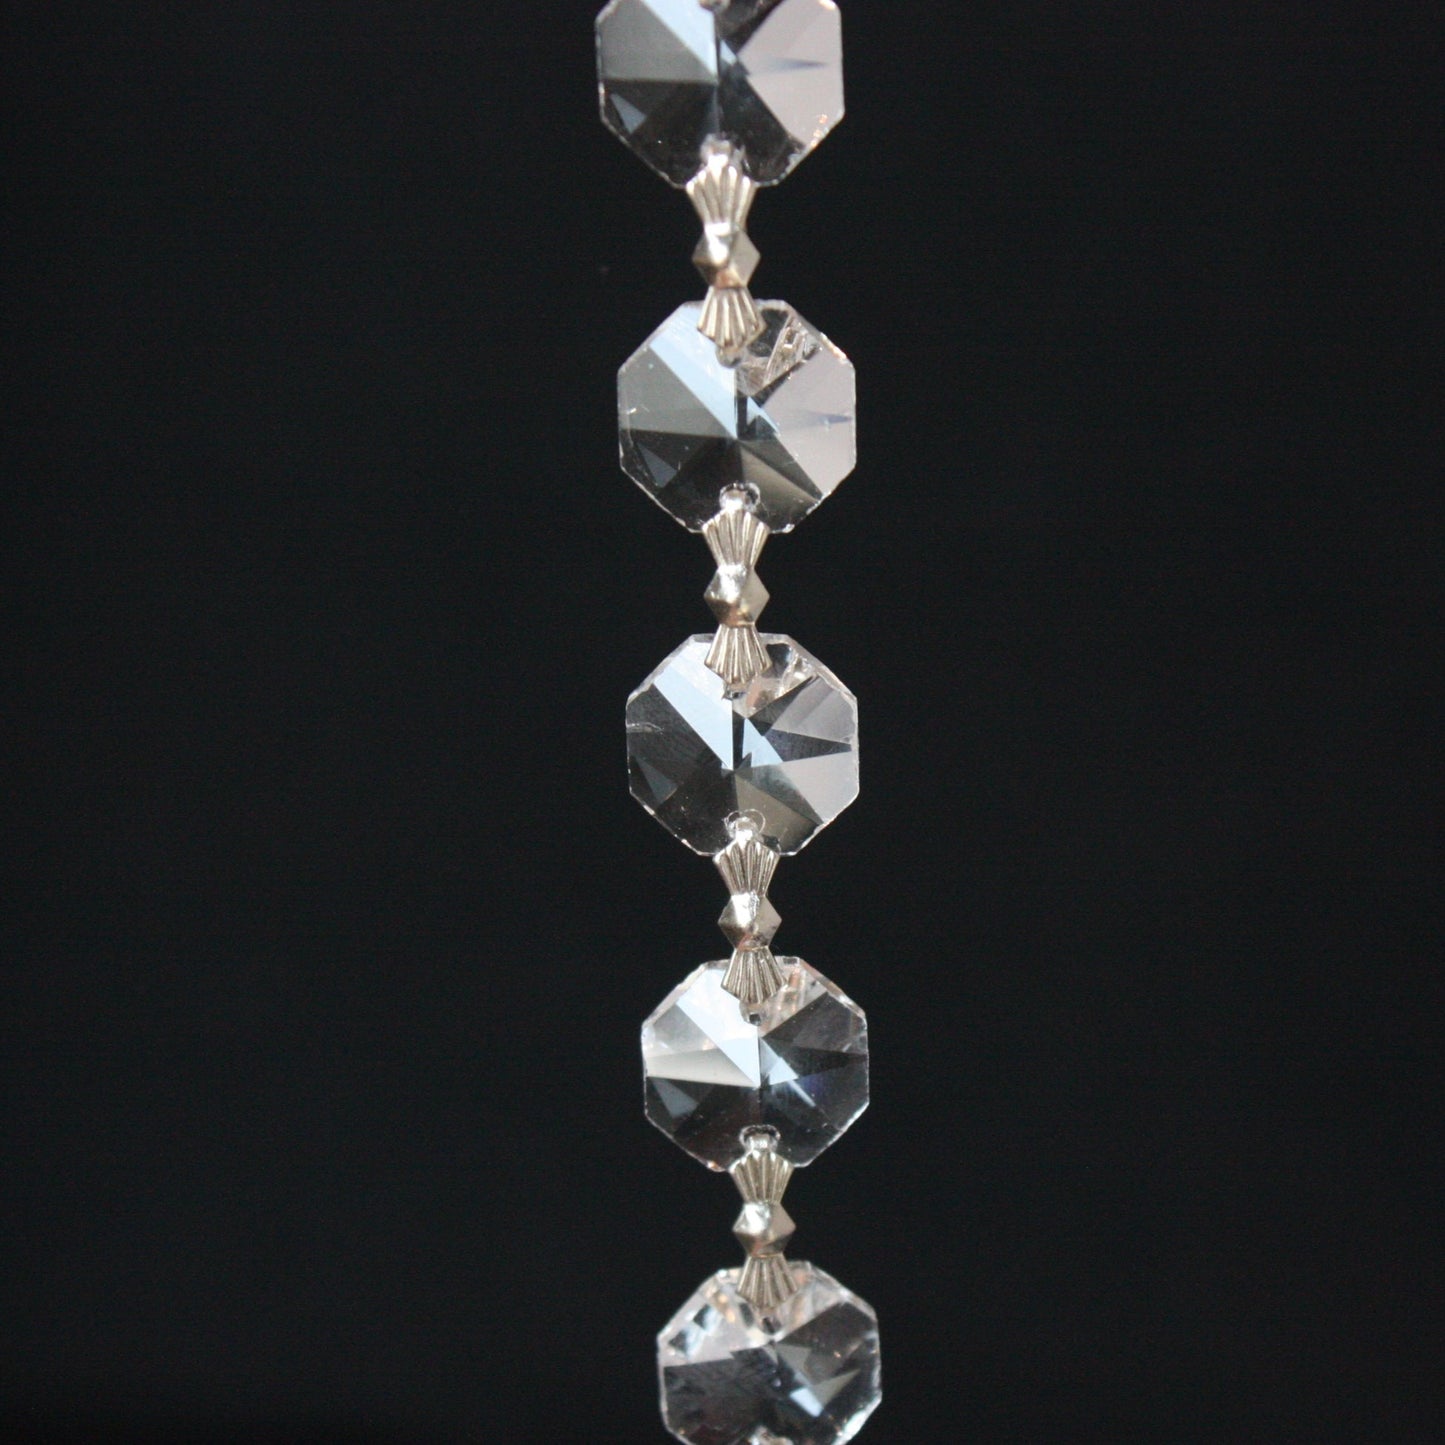 14mm Crystal Radiant Octagon Chain, 1 Meter